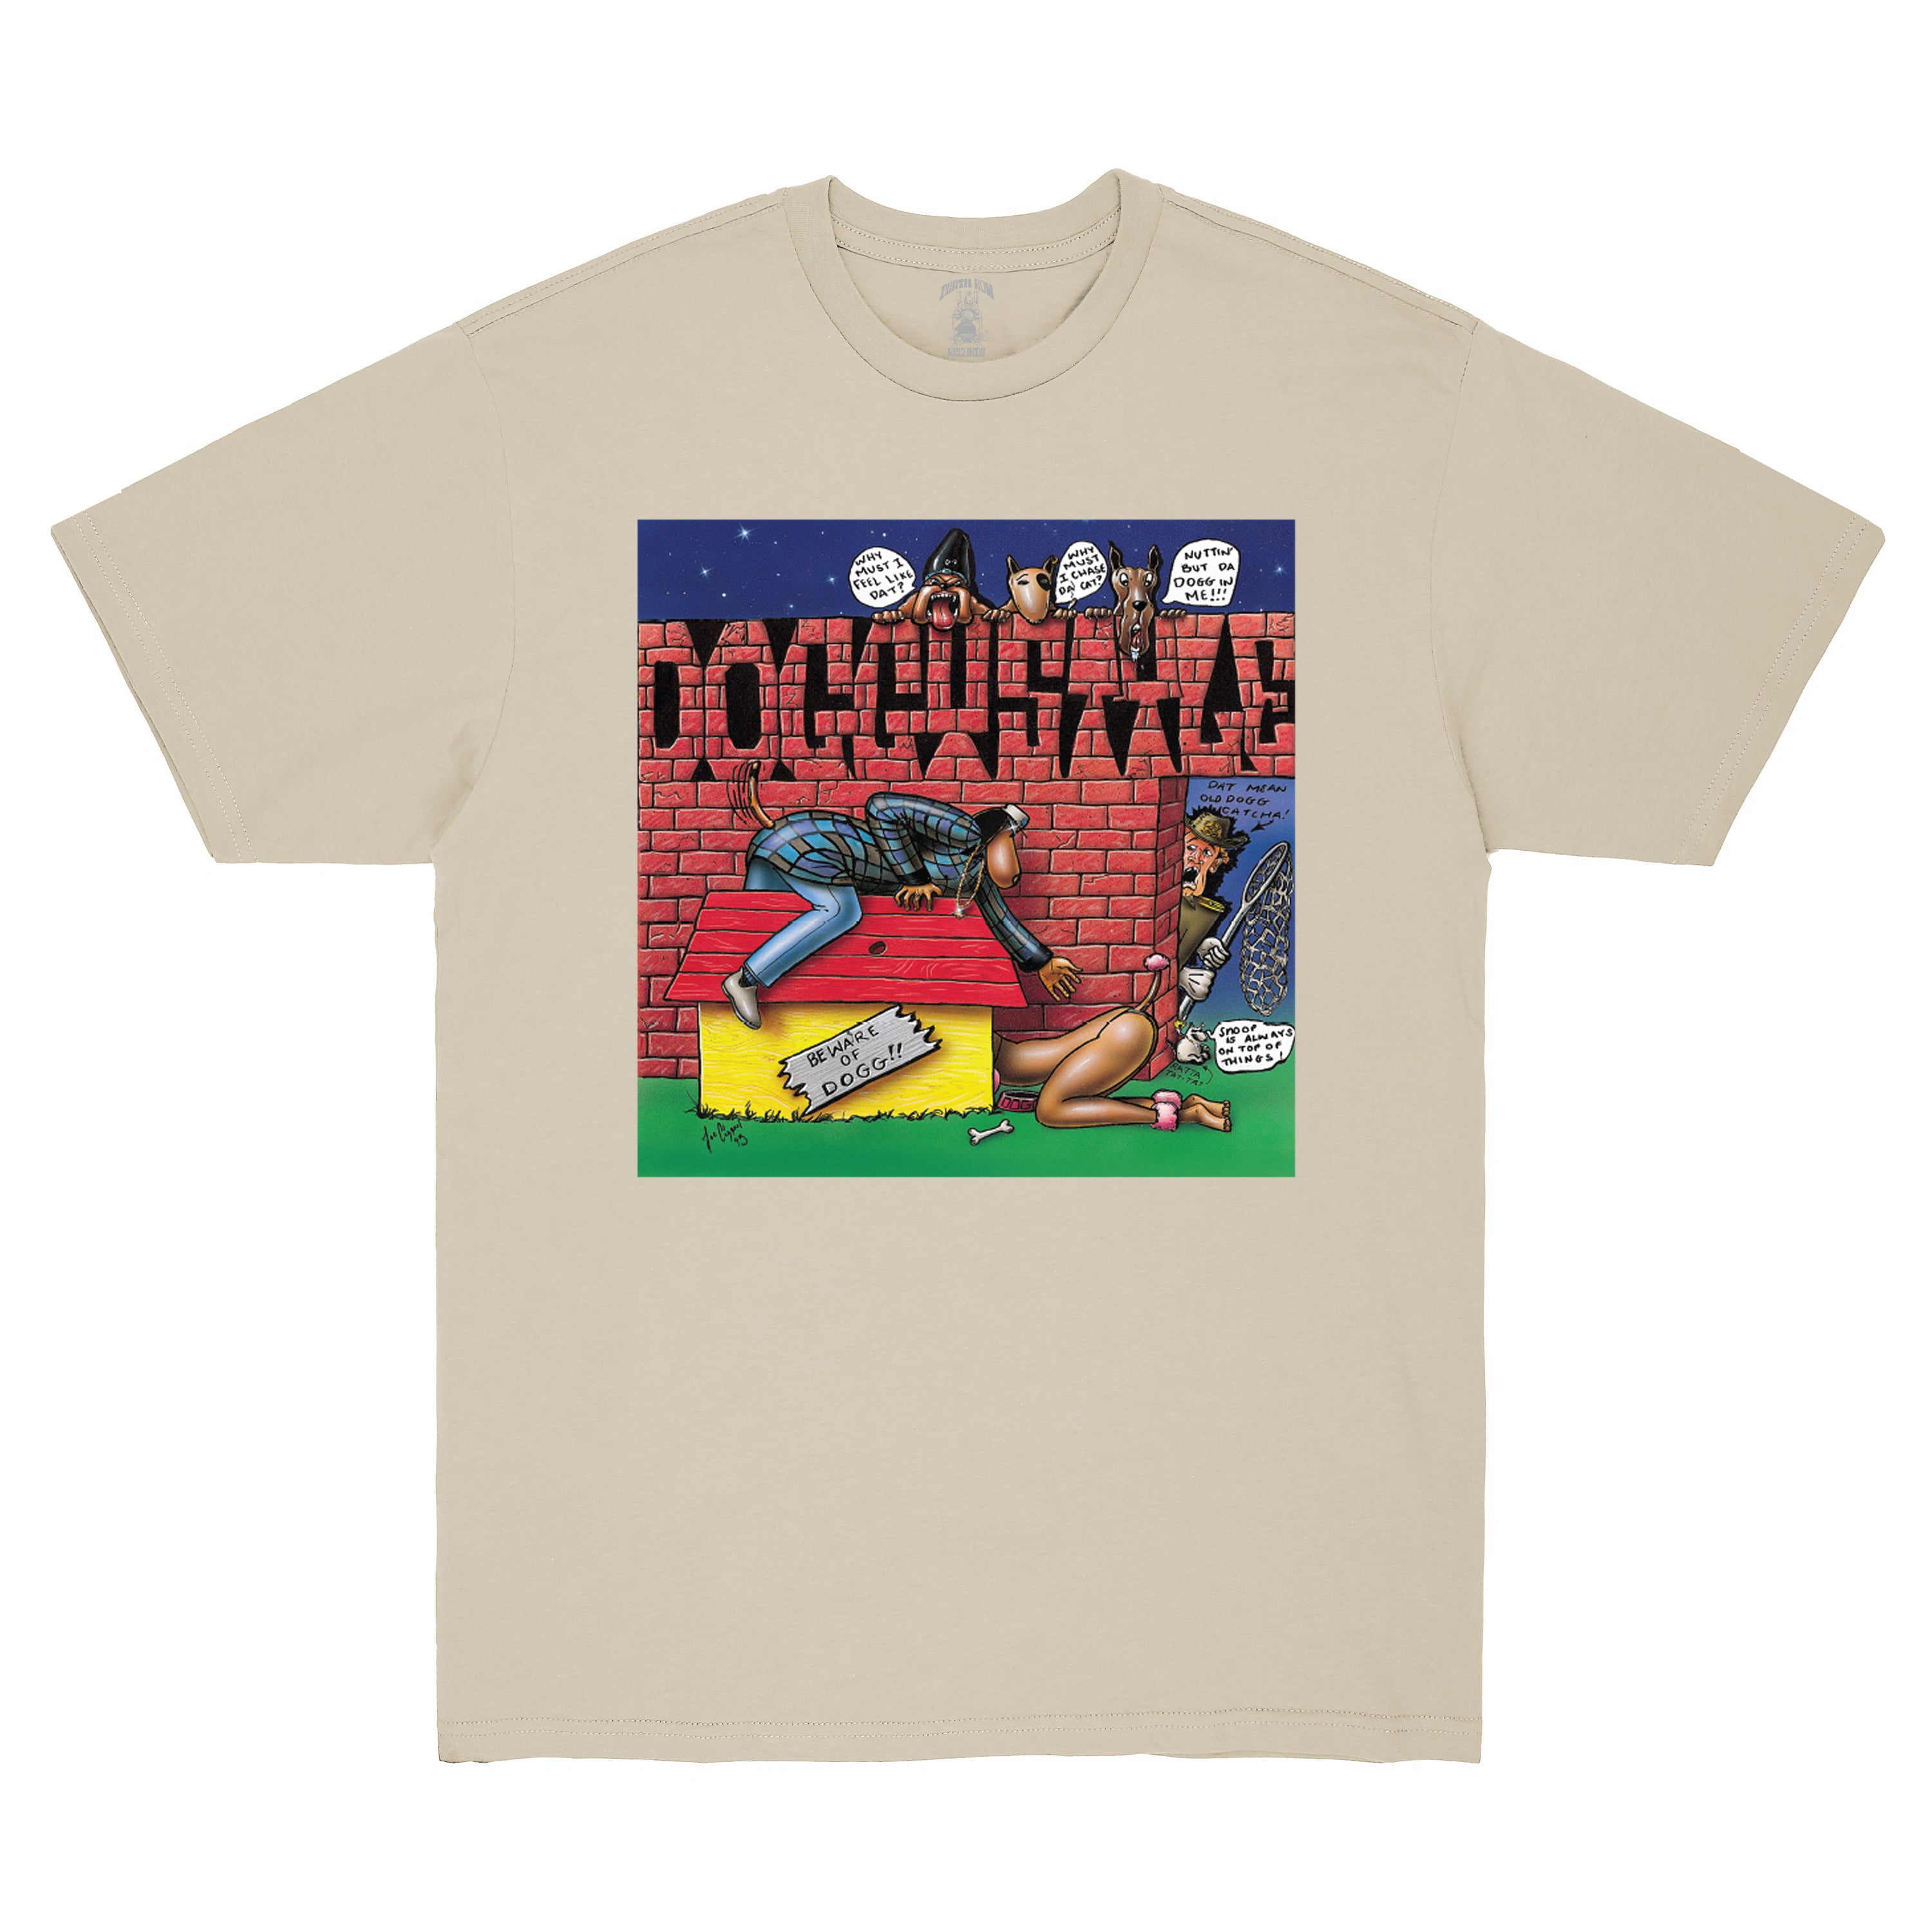 Doggystyle Album Cover Tee